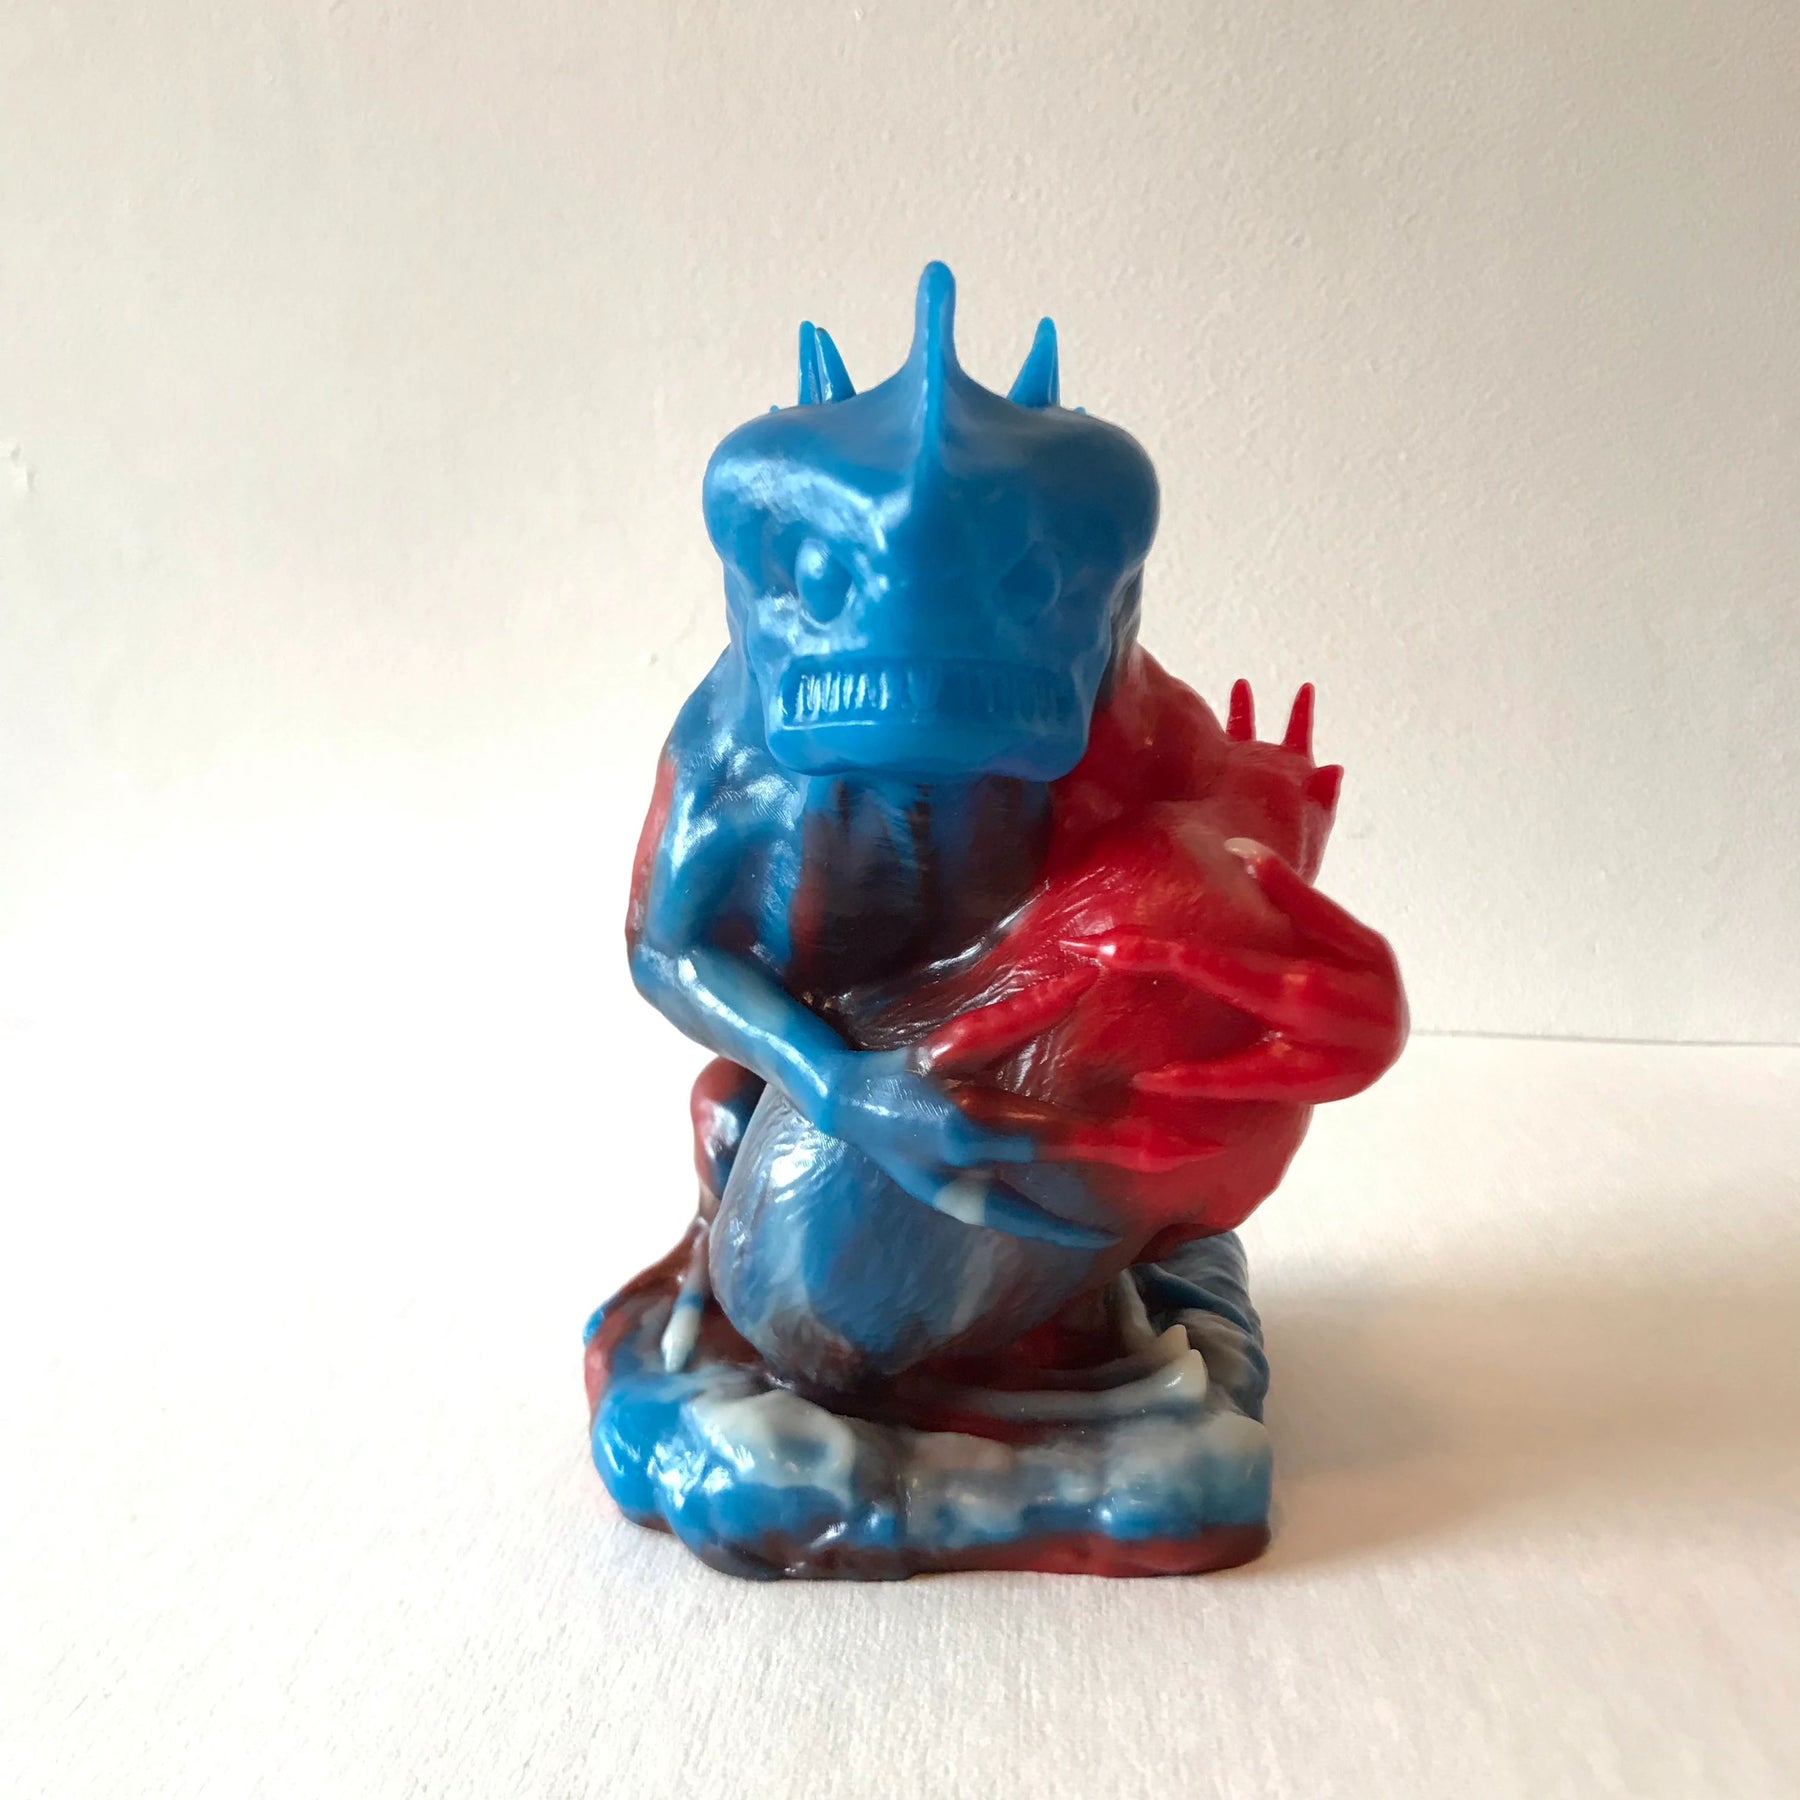 Cryptozoo-Fubi El Chupacabra Red White & Blue Edition vinyl figure by Weston Brownlee Available Now